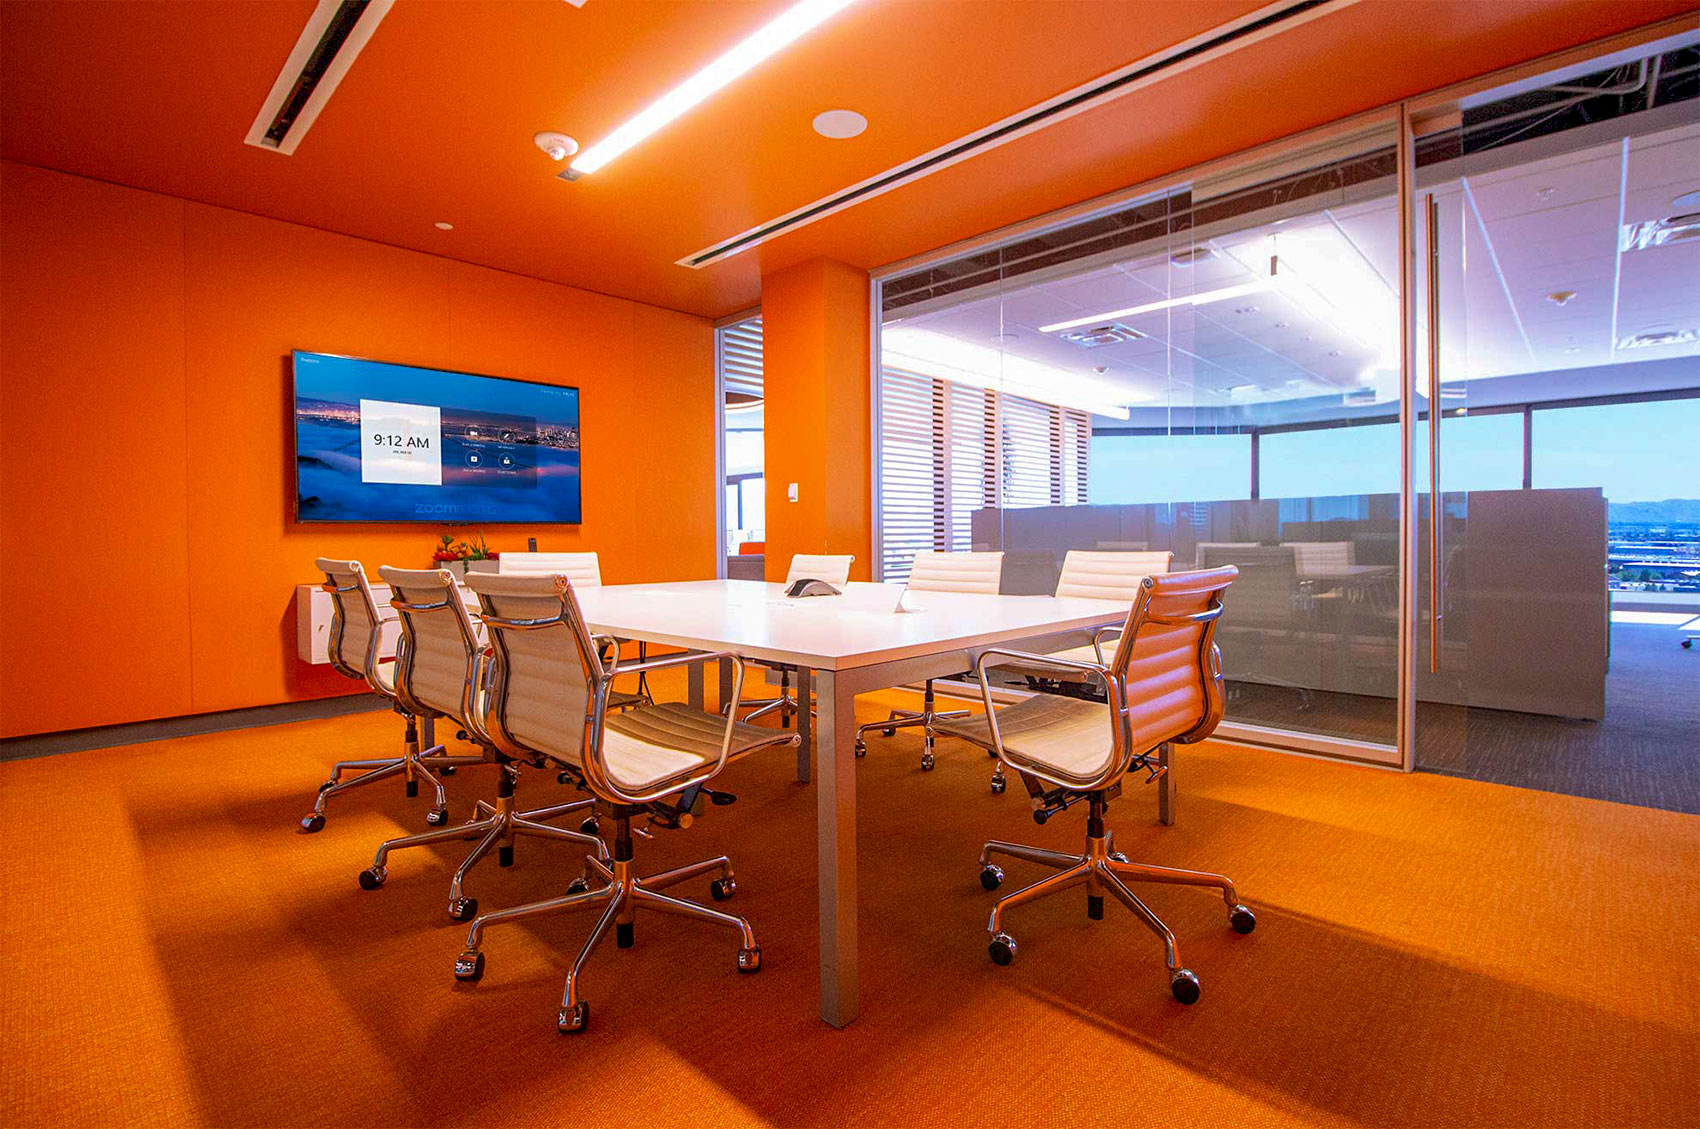 Top 5 Trends for Conference Rooms